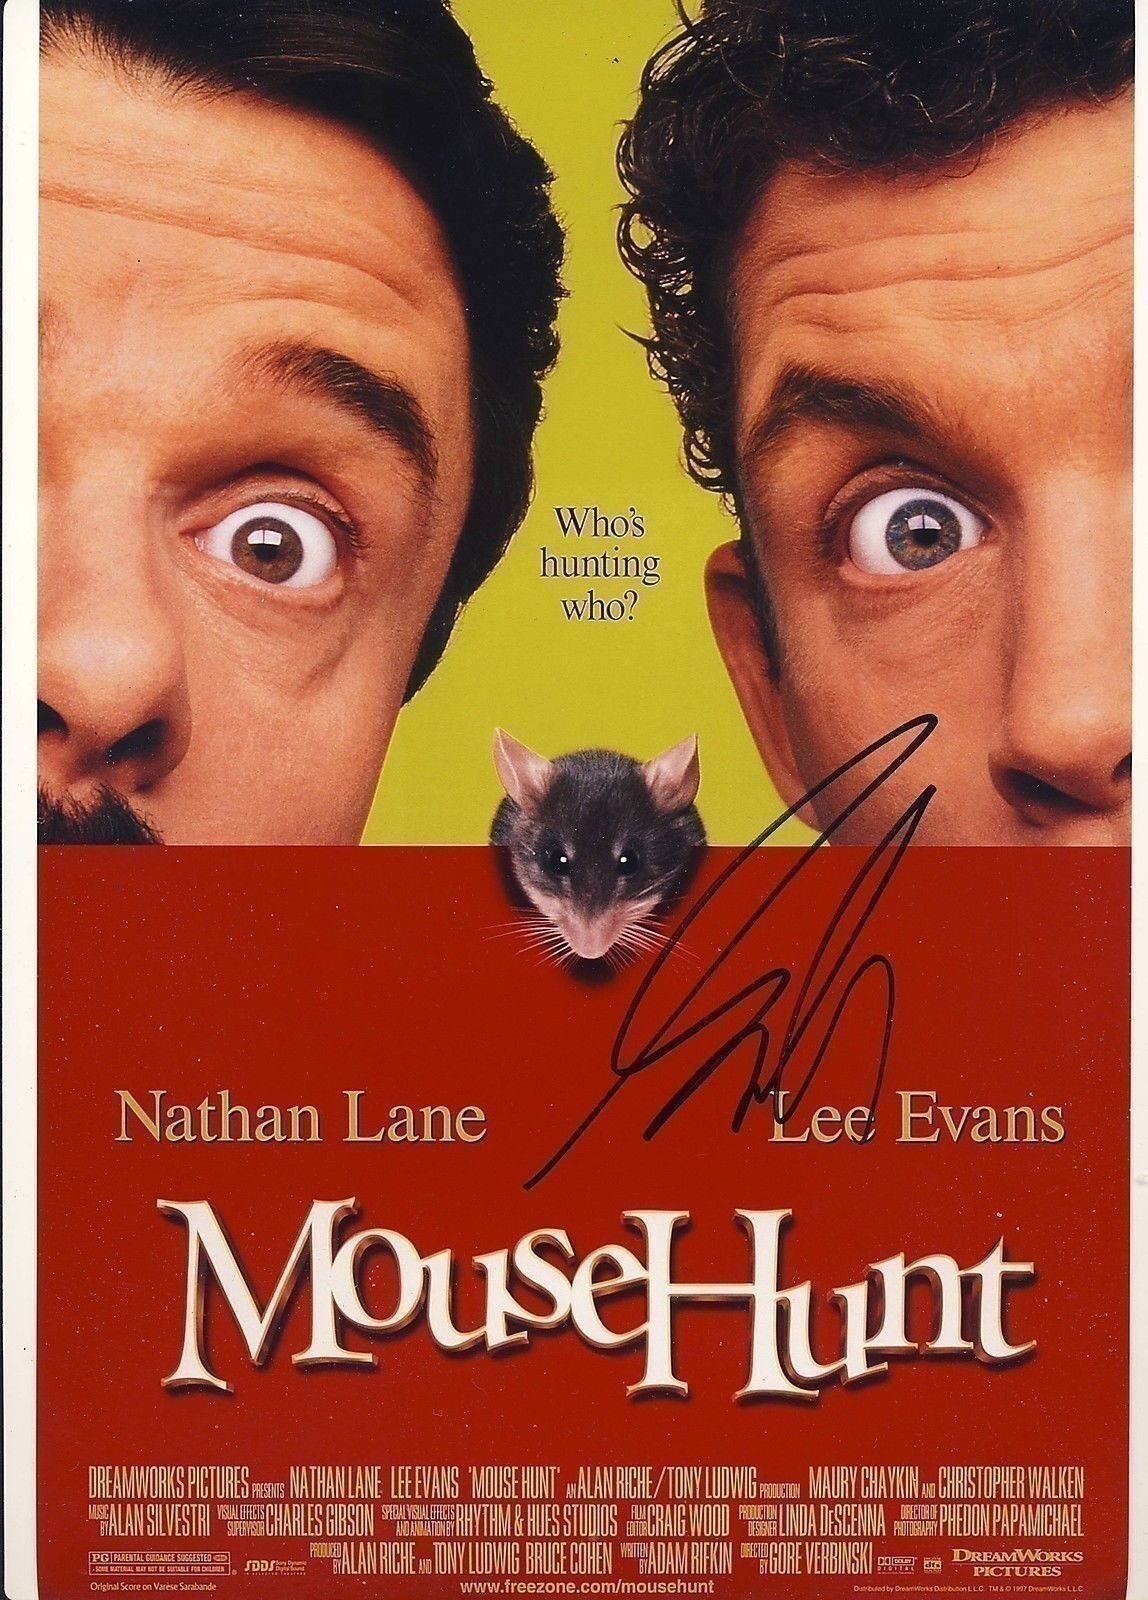 Gore Verbinski Autograph MOUSEHUNT DIRECTOR Signed 12x8 Photo Poster painting AFTAL [2882]